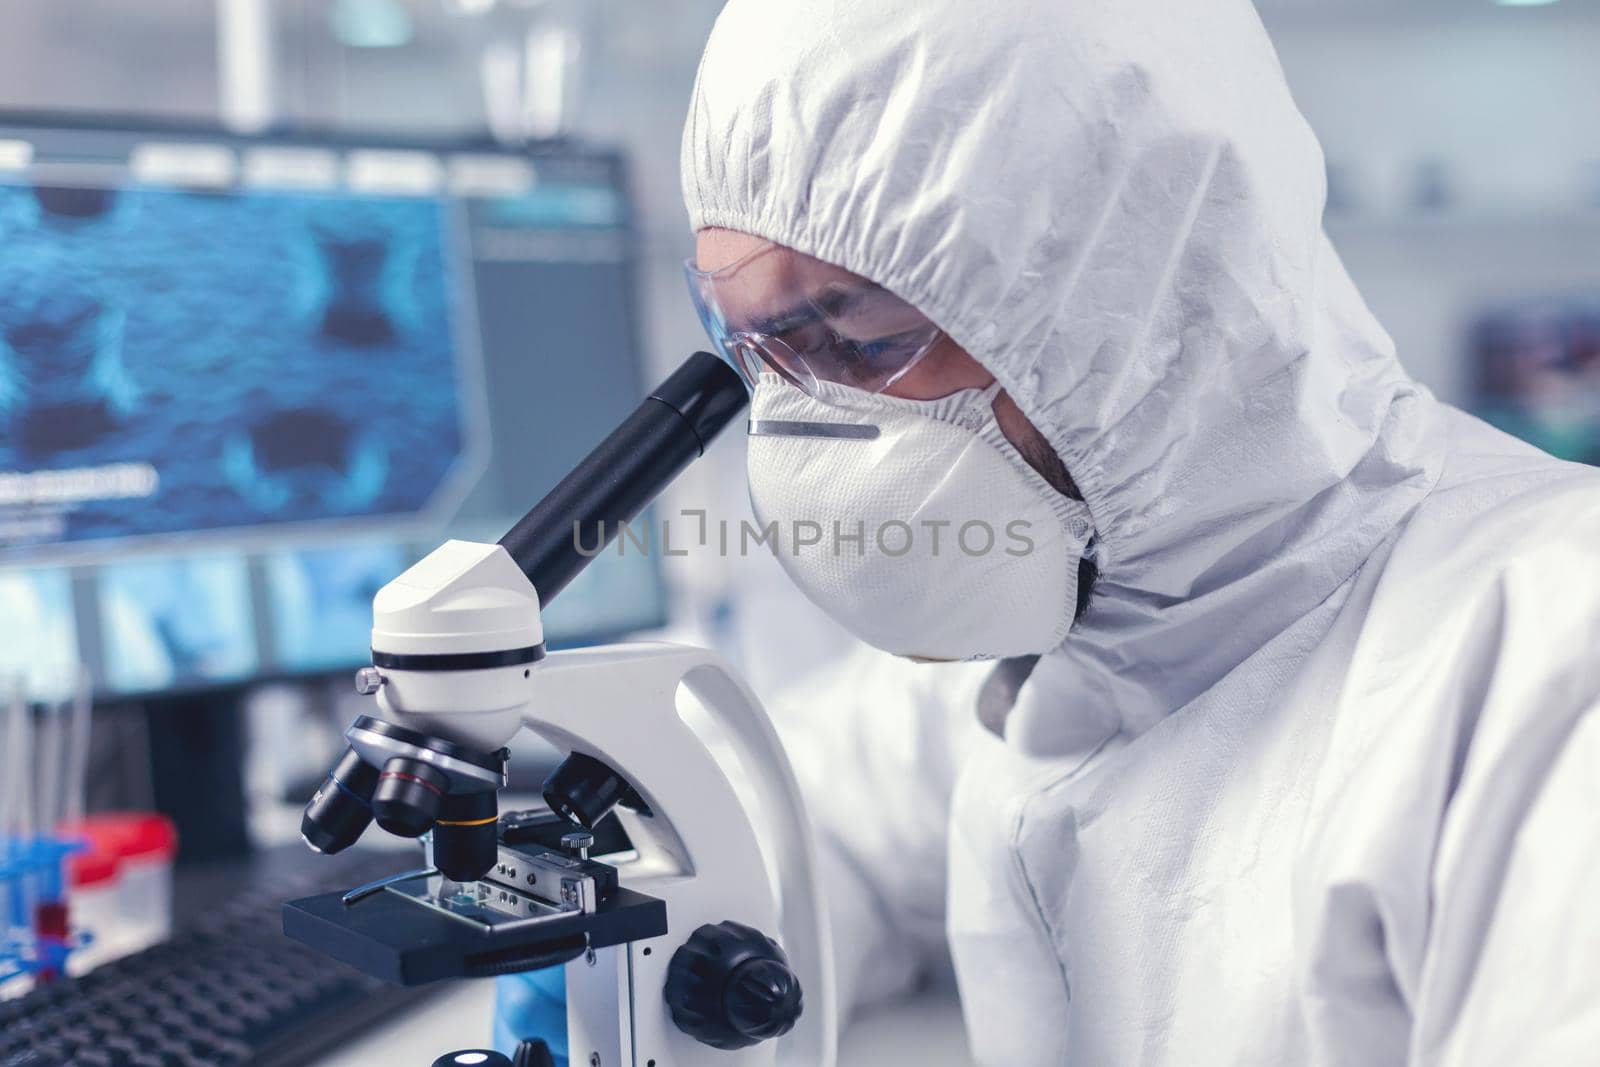 Doctor developing vaccine using microscope in modern laboraory. Virolog in coverall during coronavirus outbreak conducting healthcare scientific analysis.